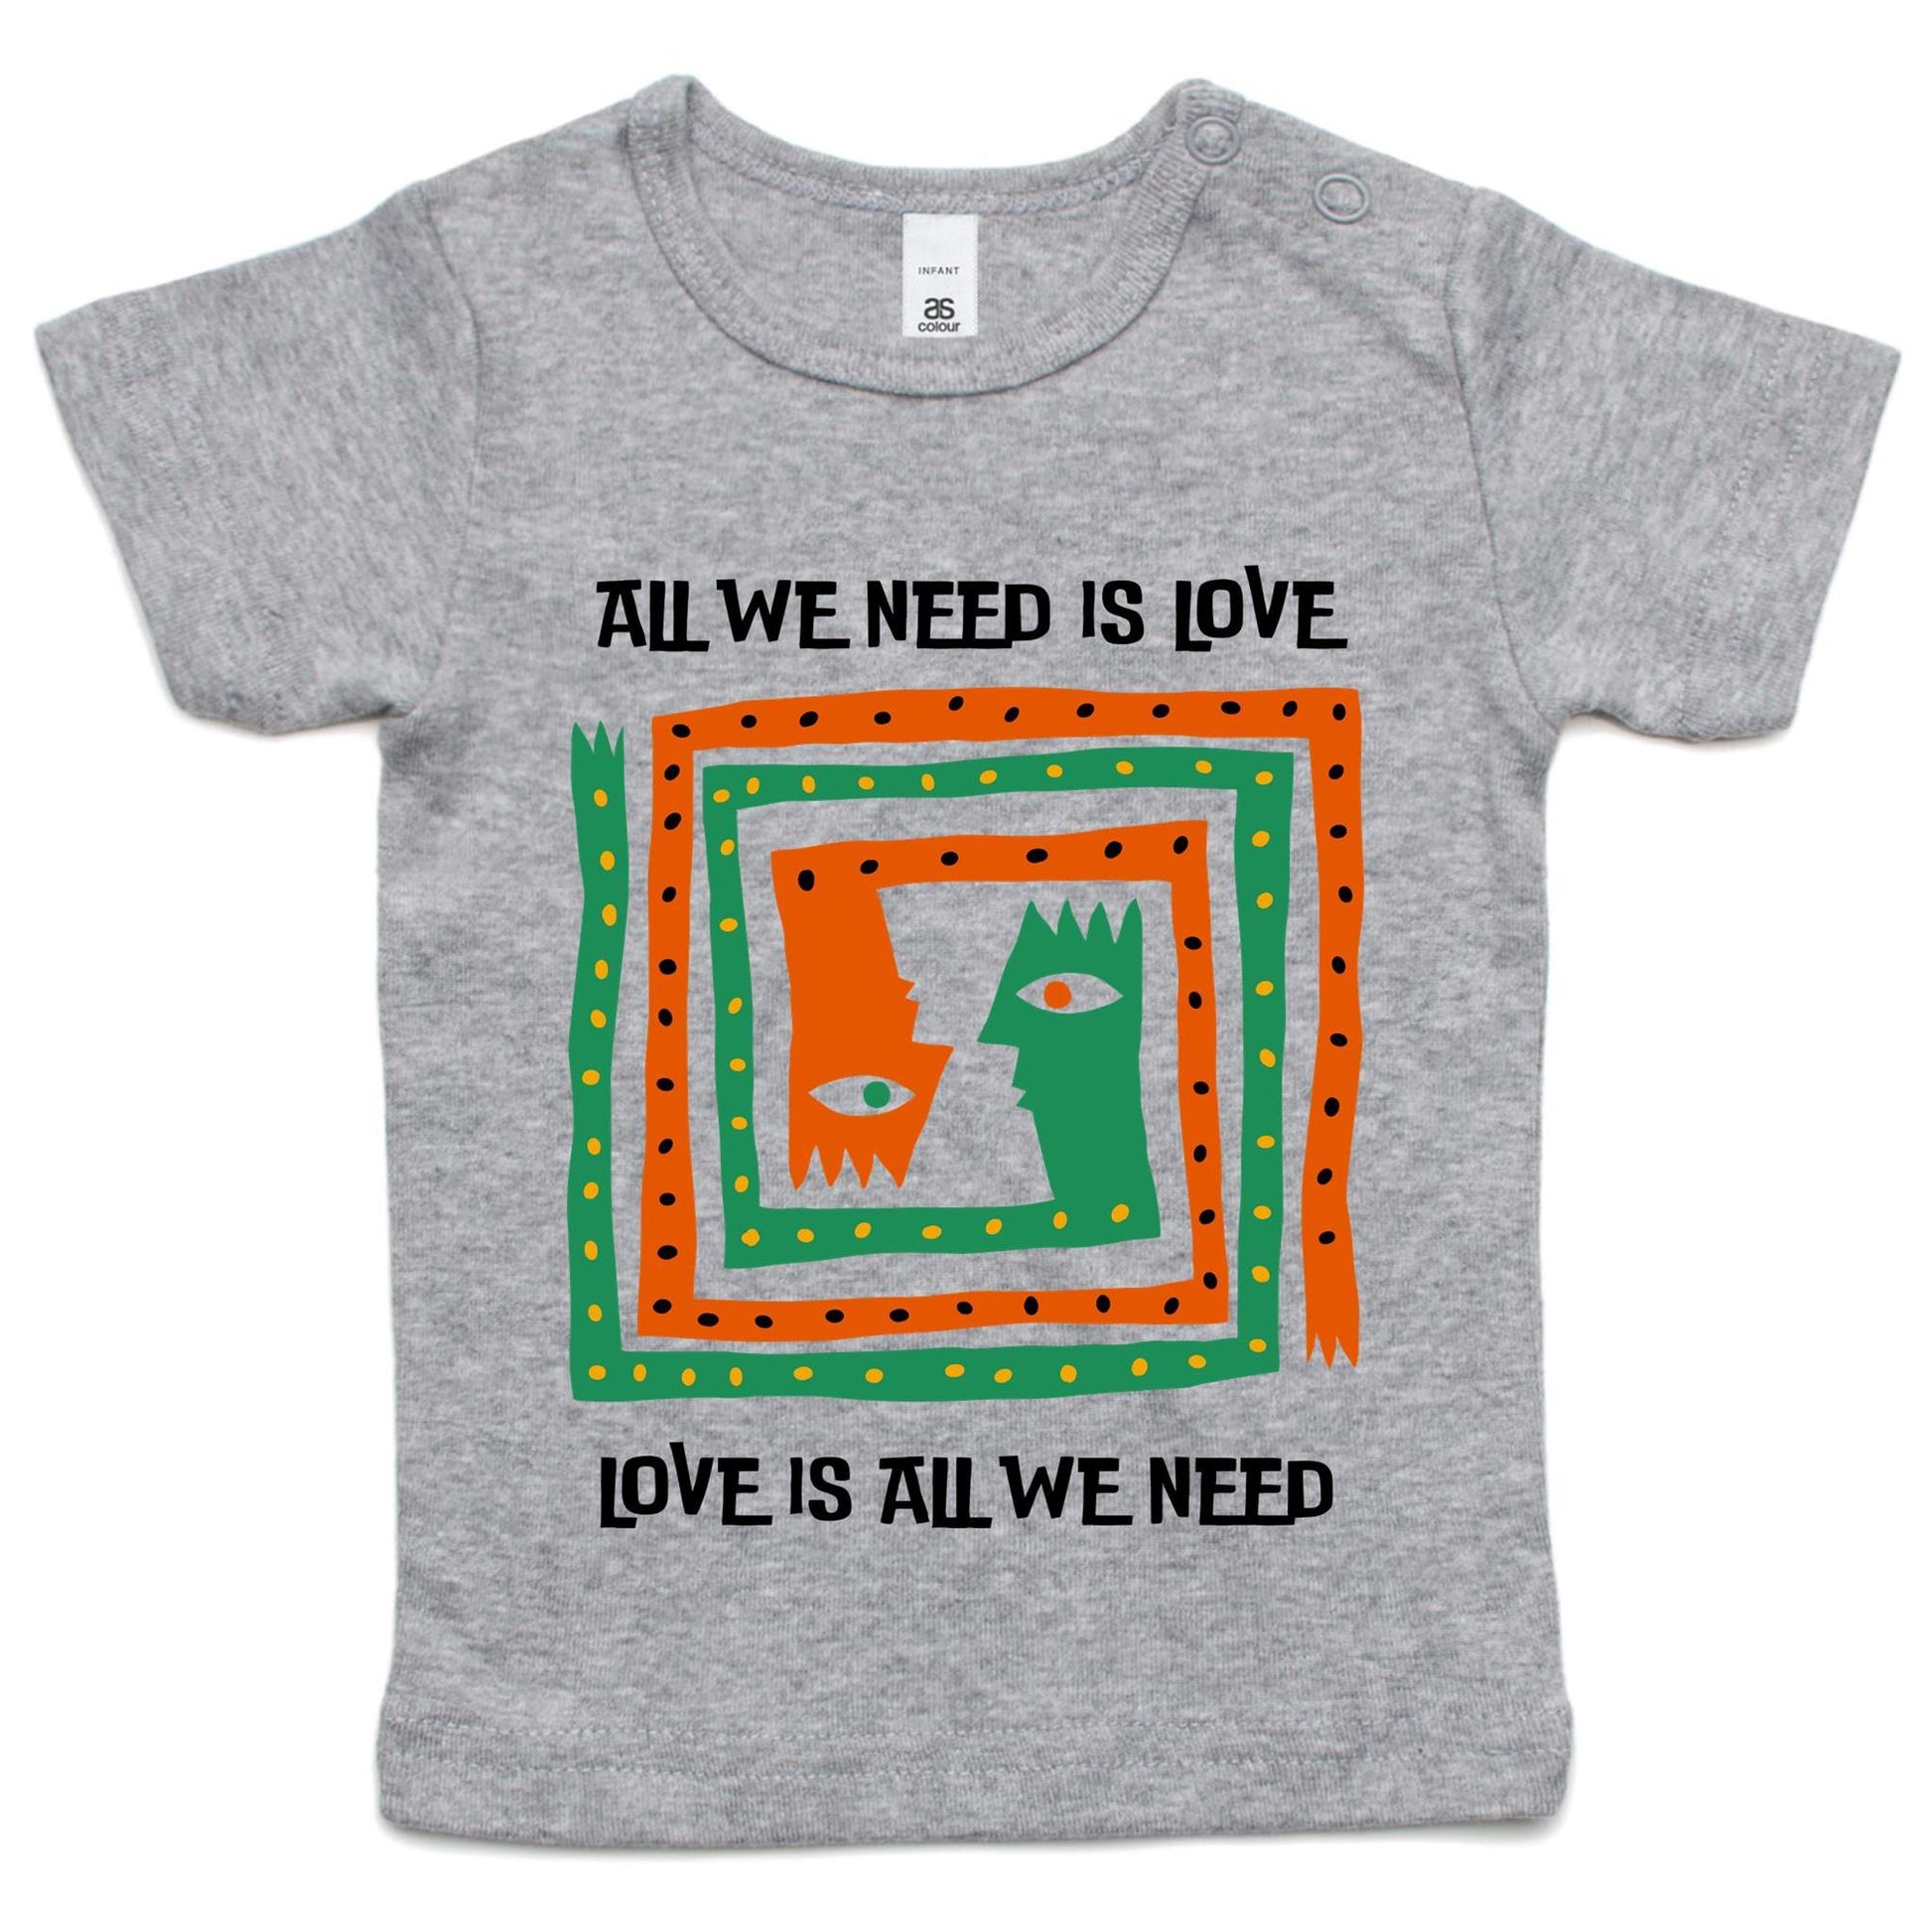 All We Need Is Love - Baby T-shirt Grey Marle Baby T-shirt